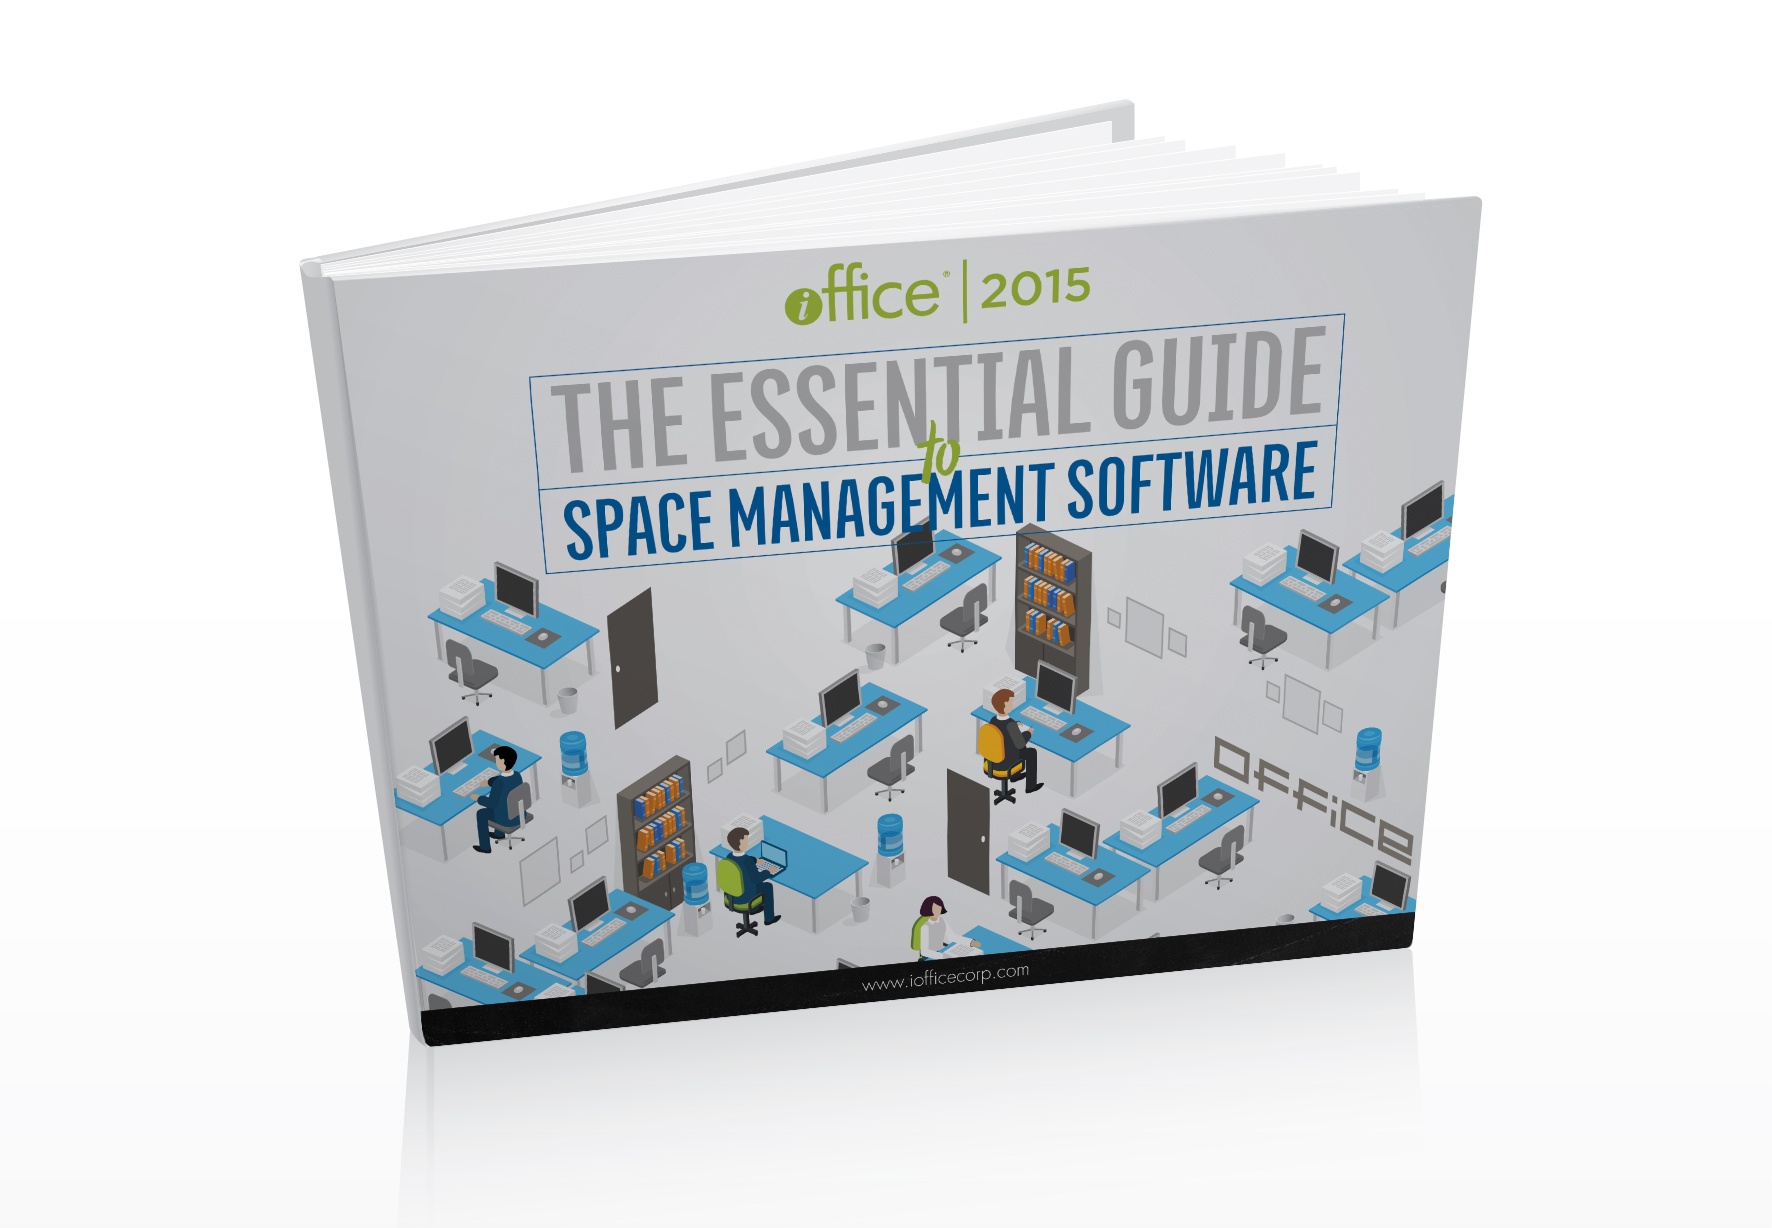 Get the essential guide to space management software